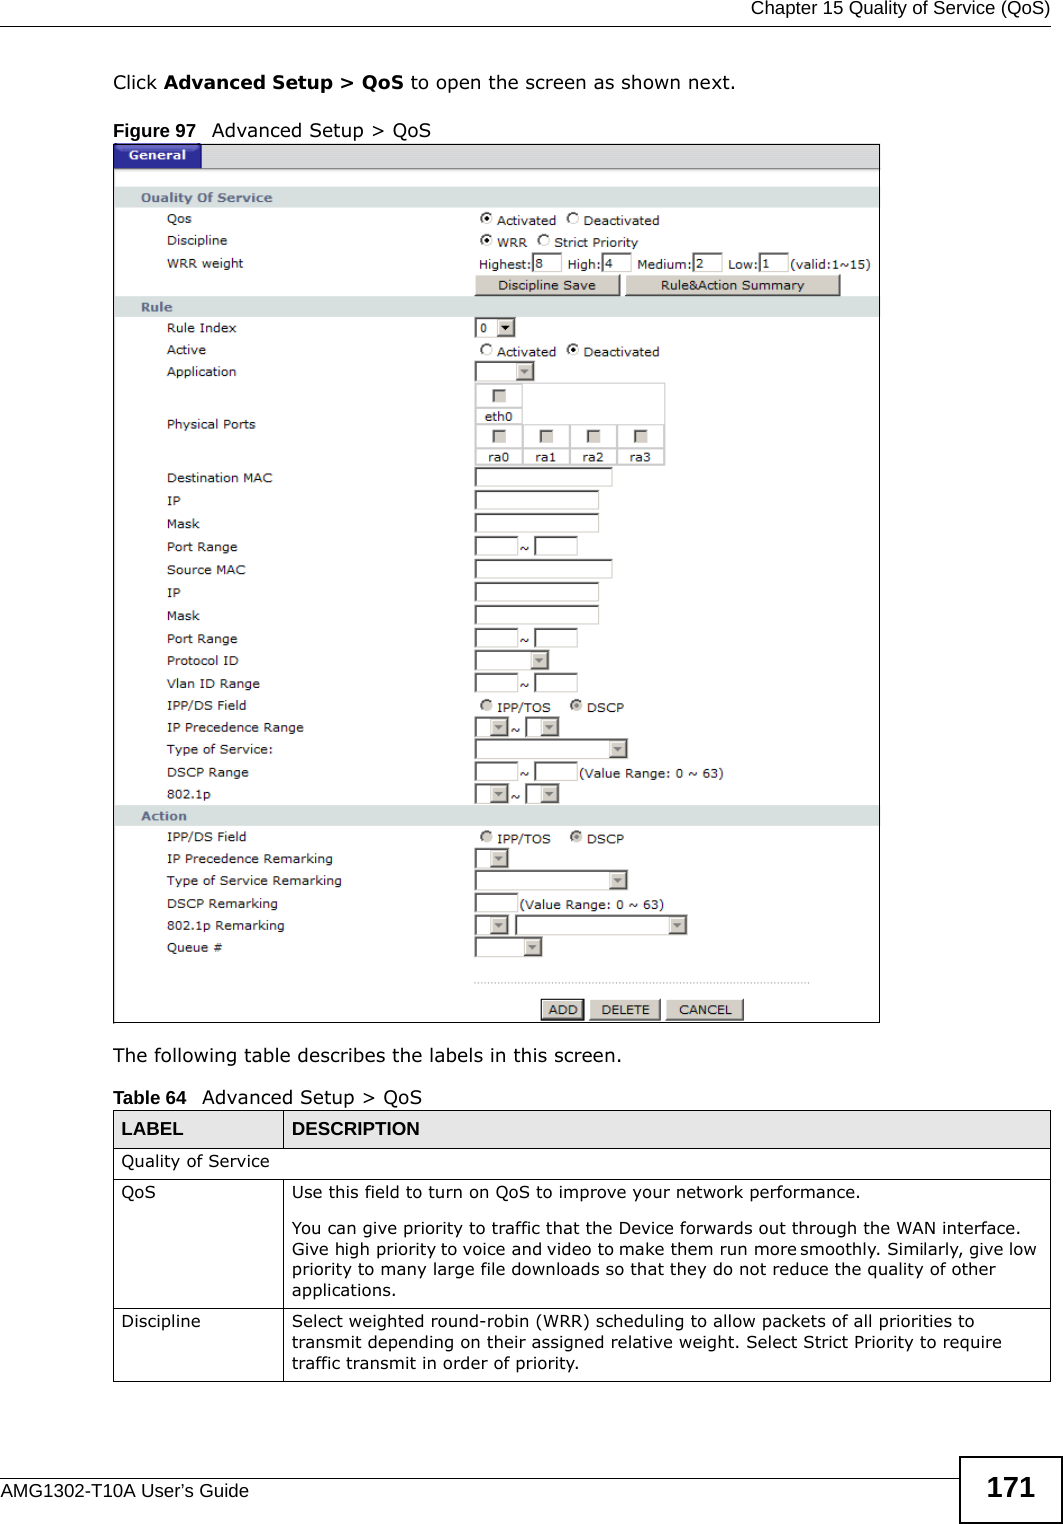  Chapter 15 Quality of Service (QoS)AMG1302-T10A User’s Guide 171Click Advanced Setup &gt; QoS to open the screen as shown next.Figure 97   Advanced Setup &gt; QoSThe following table describes the labels in this screen. Table 64   Advanced Setup &gt; QoSLABEL DESCRIPTIONQuality of ServiceQoS Use this field to turn on QoS to improve your network performance. You can give priority to traffic that the Device forwards out through the WAN interface. Give high priority to voice and video to make them run more smoothly. Similarly, give low priority to many large file downloads so that they do not reduce the quality of other applications. Discipline Select weighted round-robin (WRR) scheduling to allow packets of all priorities to transmit depending on their assigned relative weight. Select Strict Priority to require traffic transmit in order of priority.